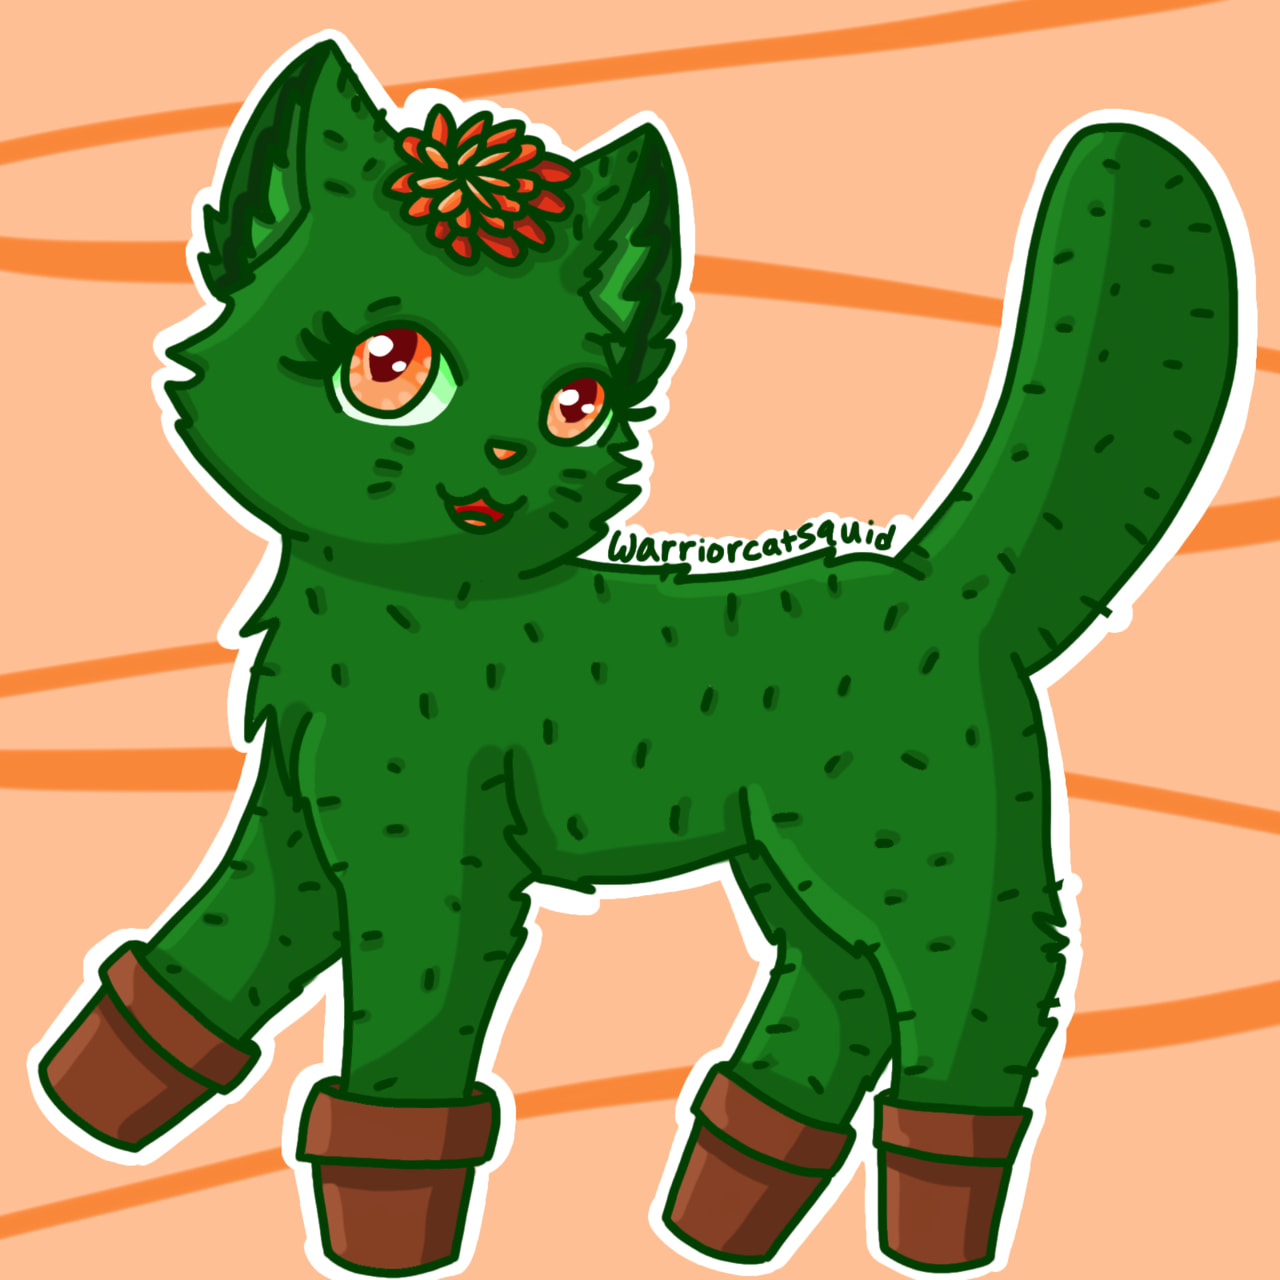 #Fusion #FusionChallenge #fridayswithsketch @sonysketch i know this looks very wonky. But here is my #cactus #cat or should i say, #Catus #cactuscat XD 🐱 🌵 🐱🌵🐱🌵🐱🌵🐱🌵🐱🌵🐱🌵🐱🌵🐱🌵